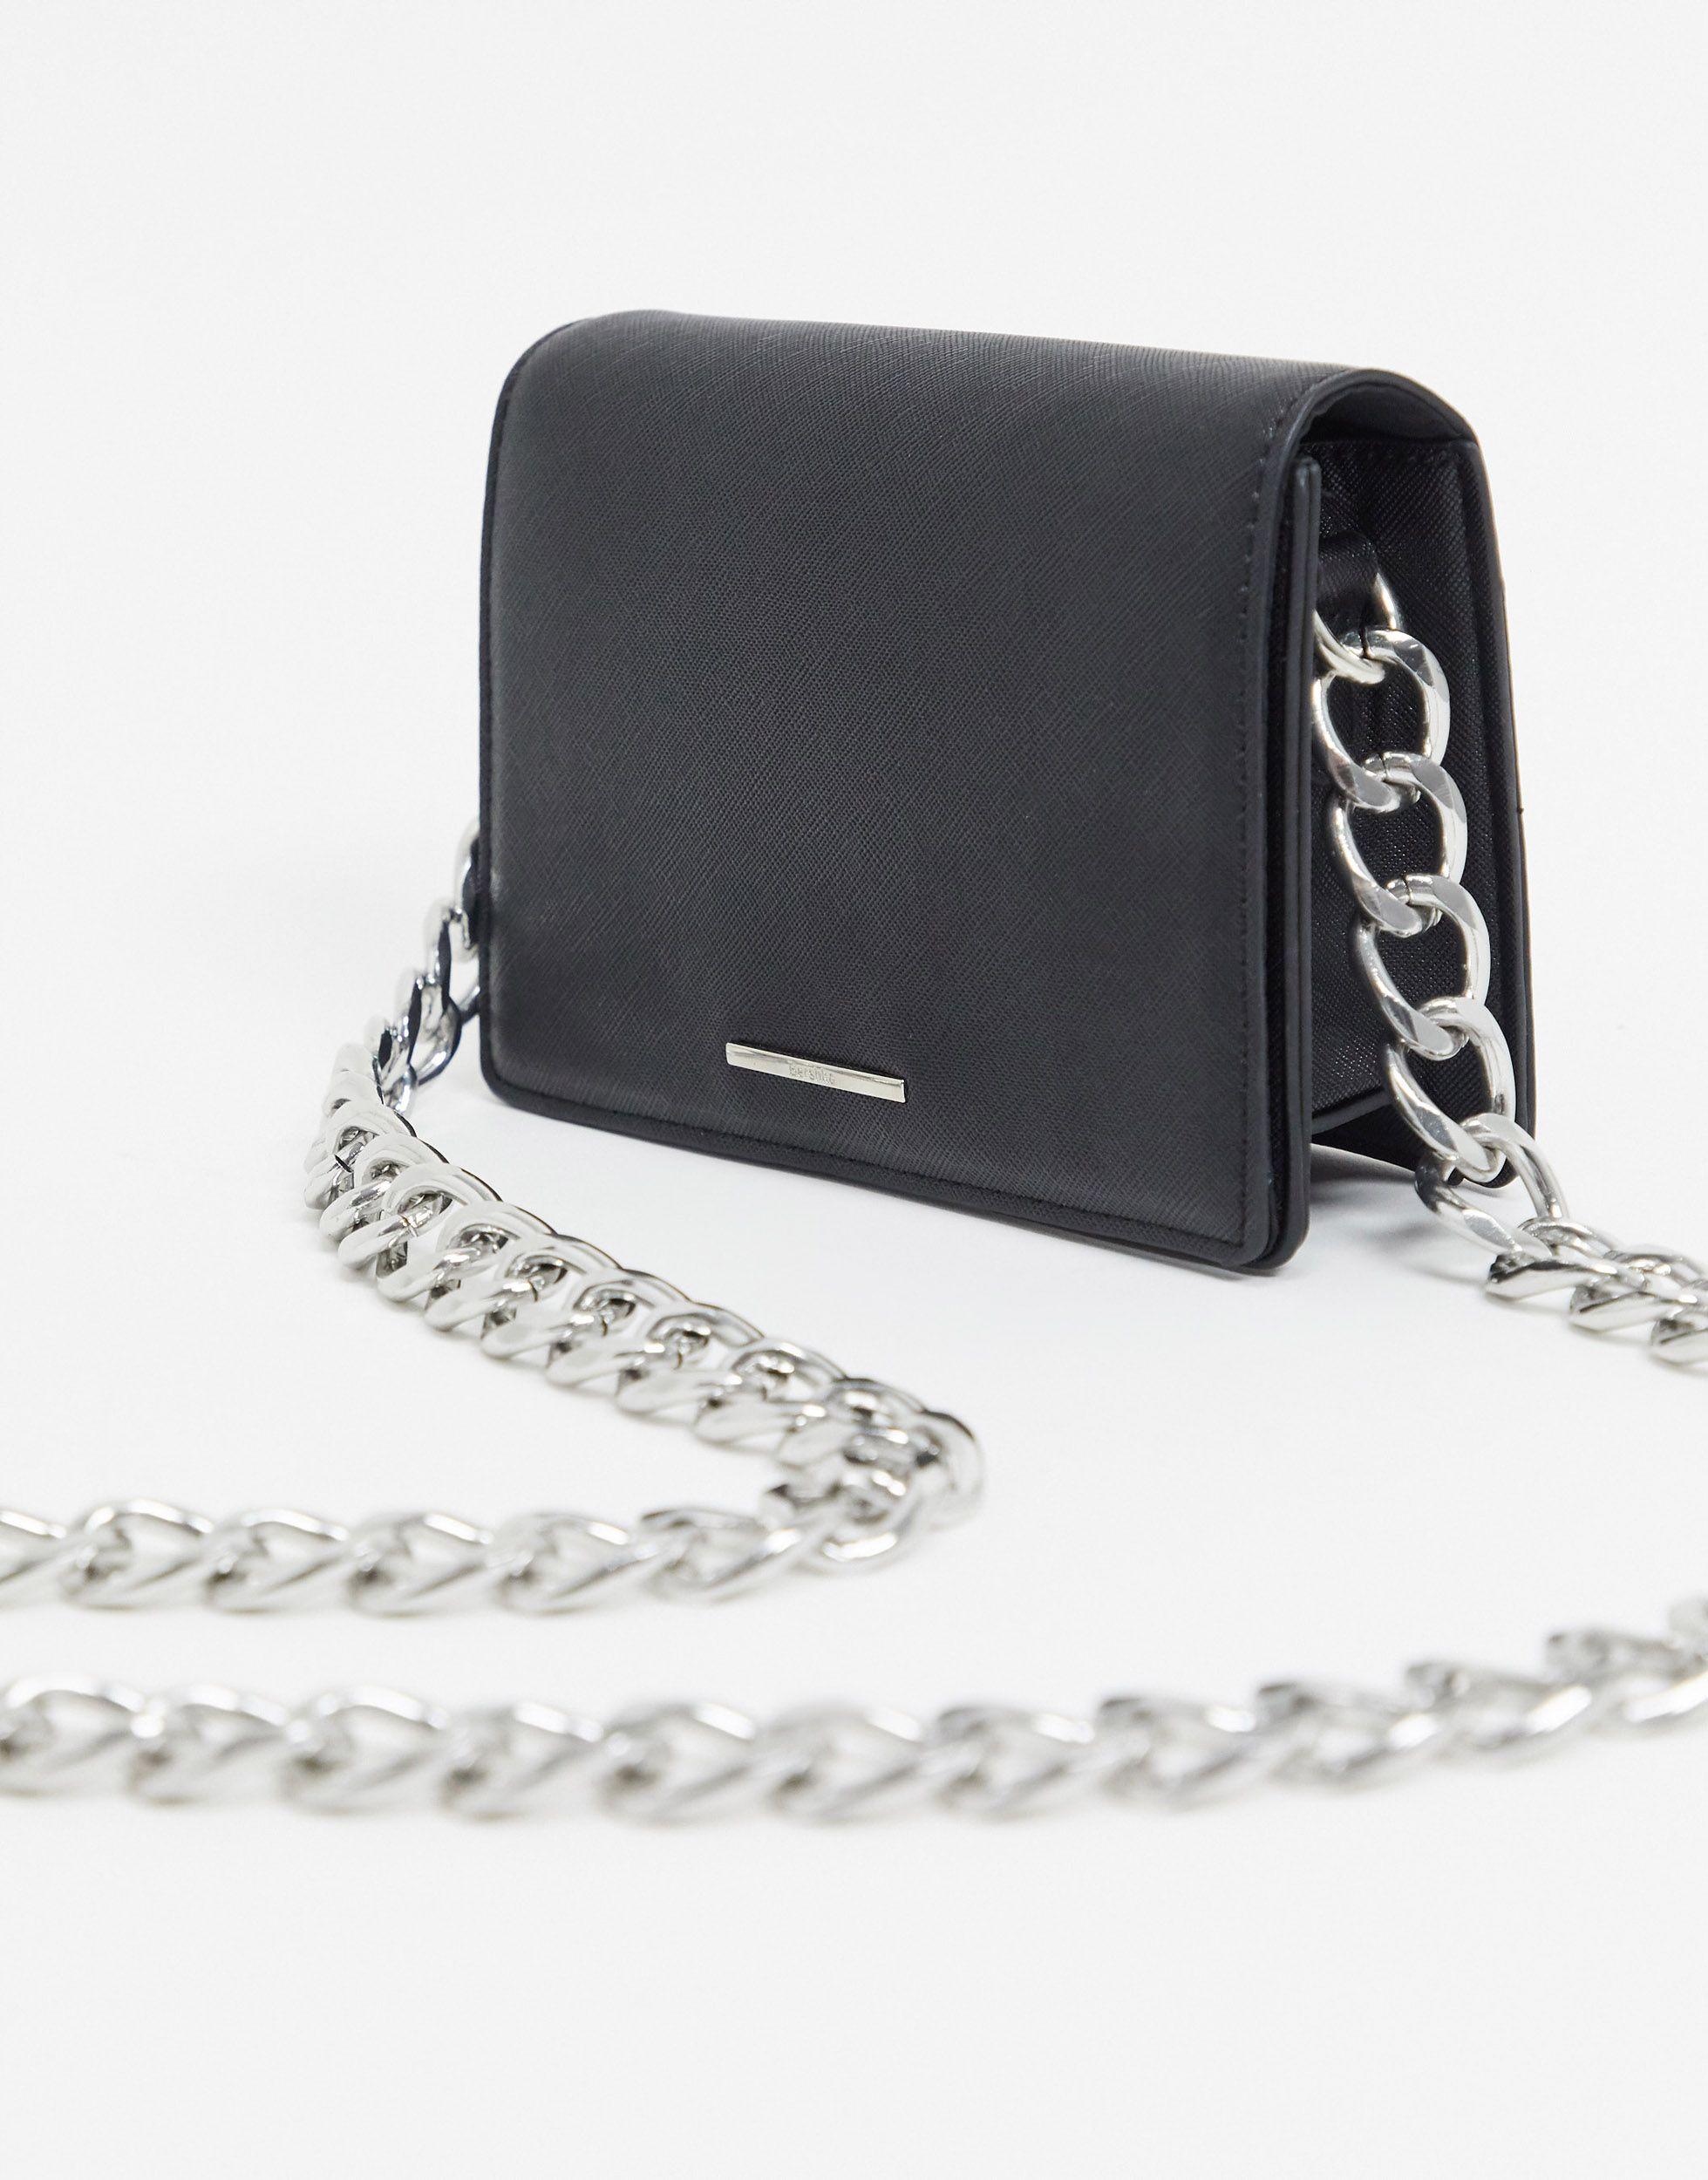 Bershka Small Cross Body Bag With Thick Chain Strap | Lyst